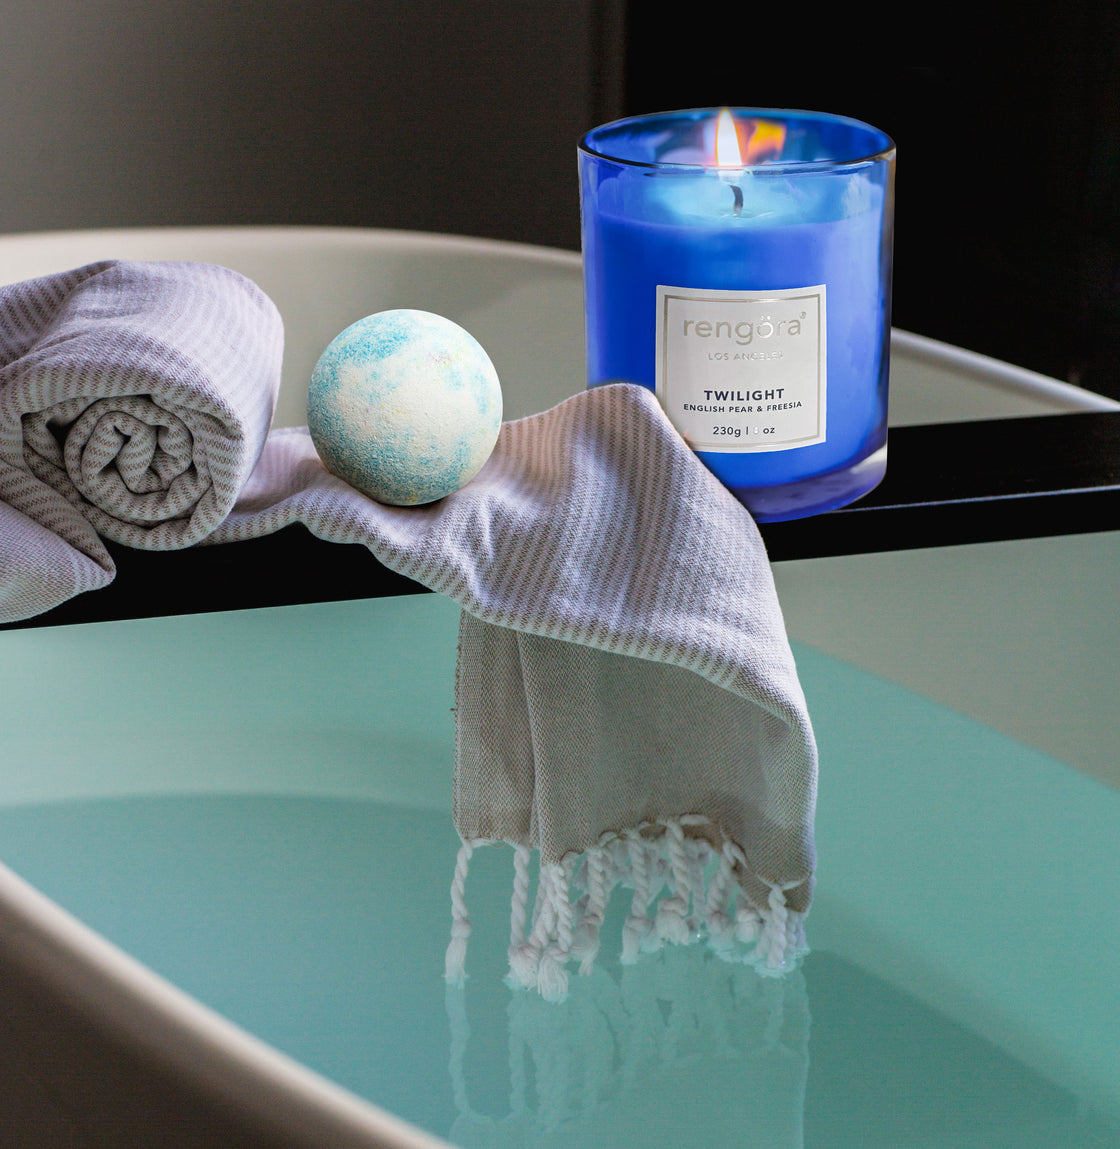 rengöra's Twilight-scented home candle presented in an exquisite cobalt blue glass featuring English pear and freesia is partnered with a Rengora bath bomb  all set for a relaxing bath time experience!"